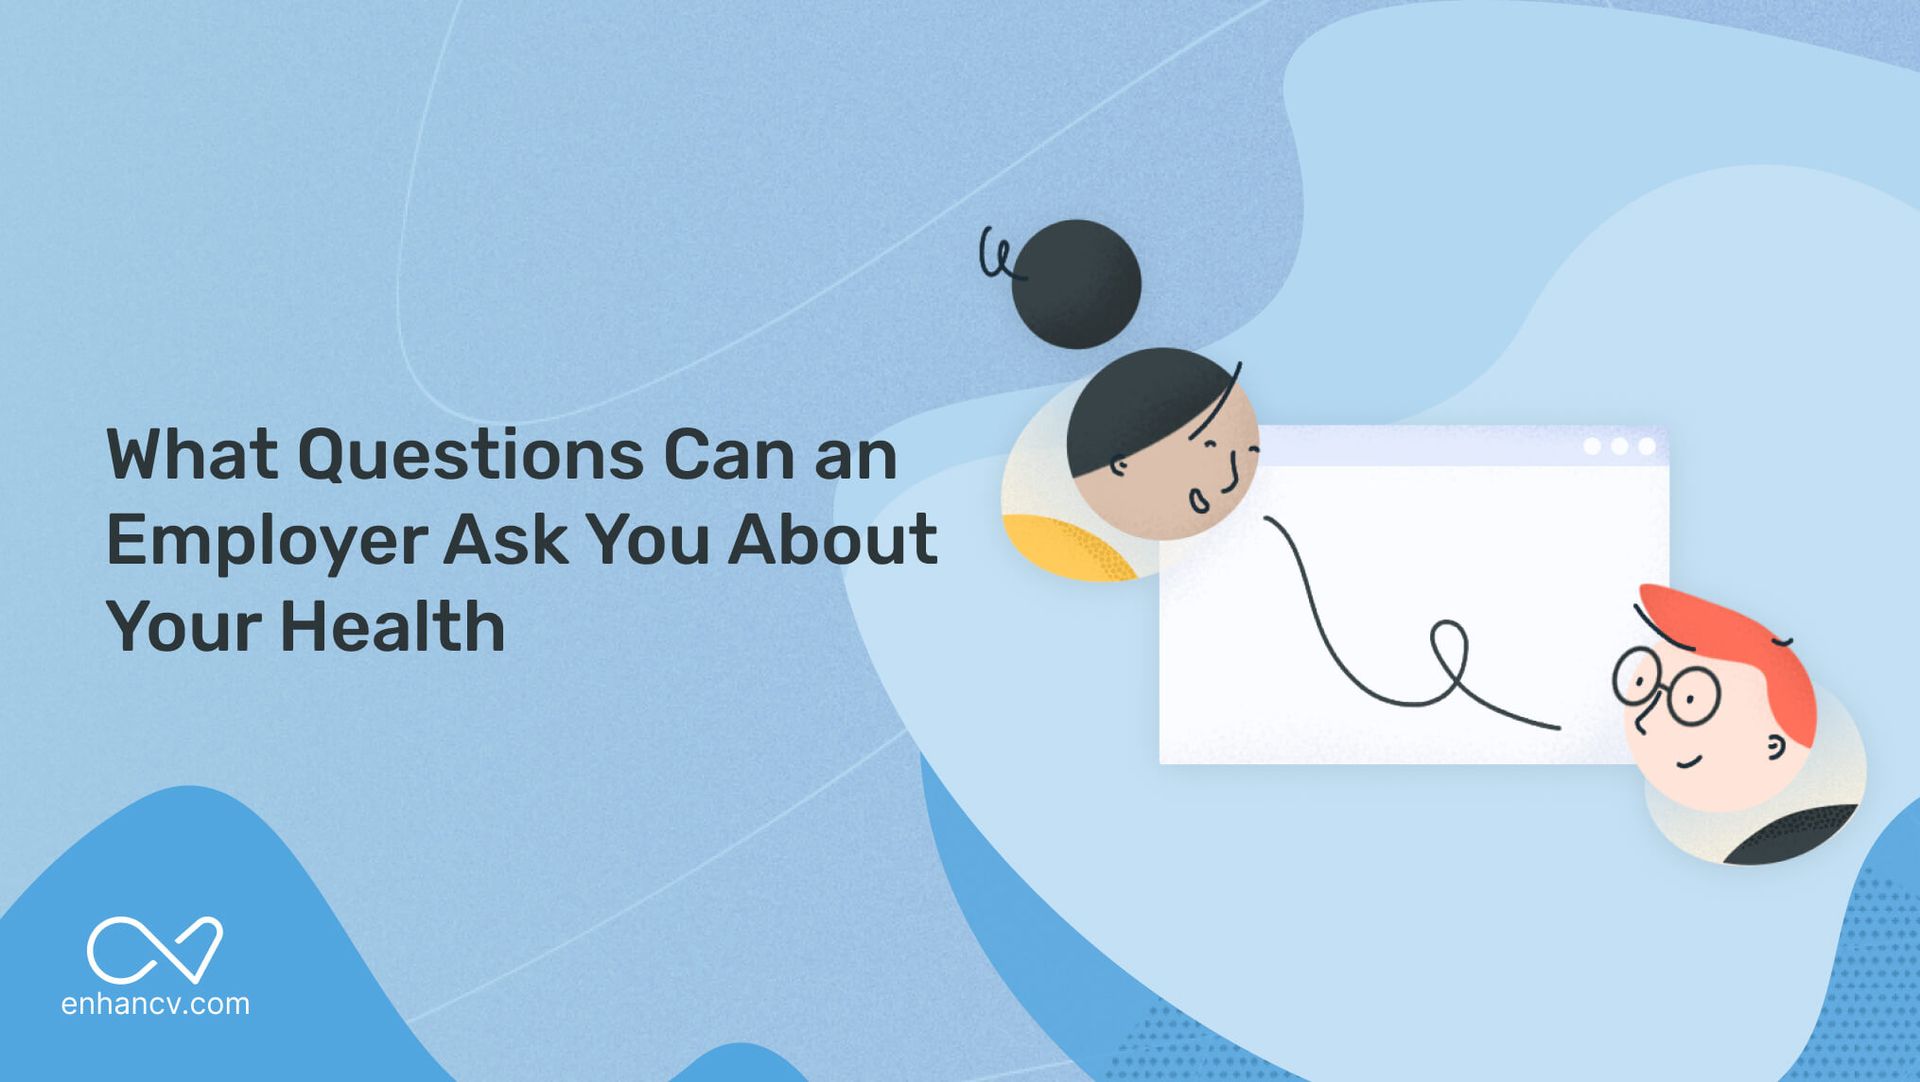 What Questions Can an Employer Ask You About Your Health blog header image.jpeg